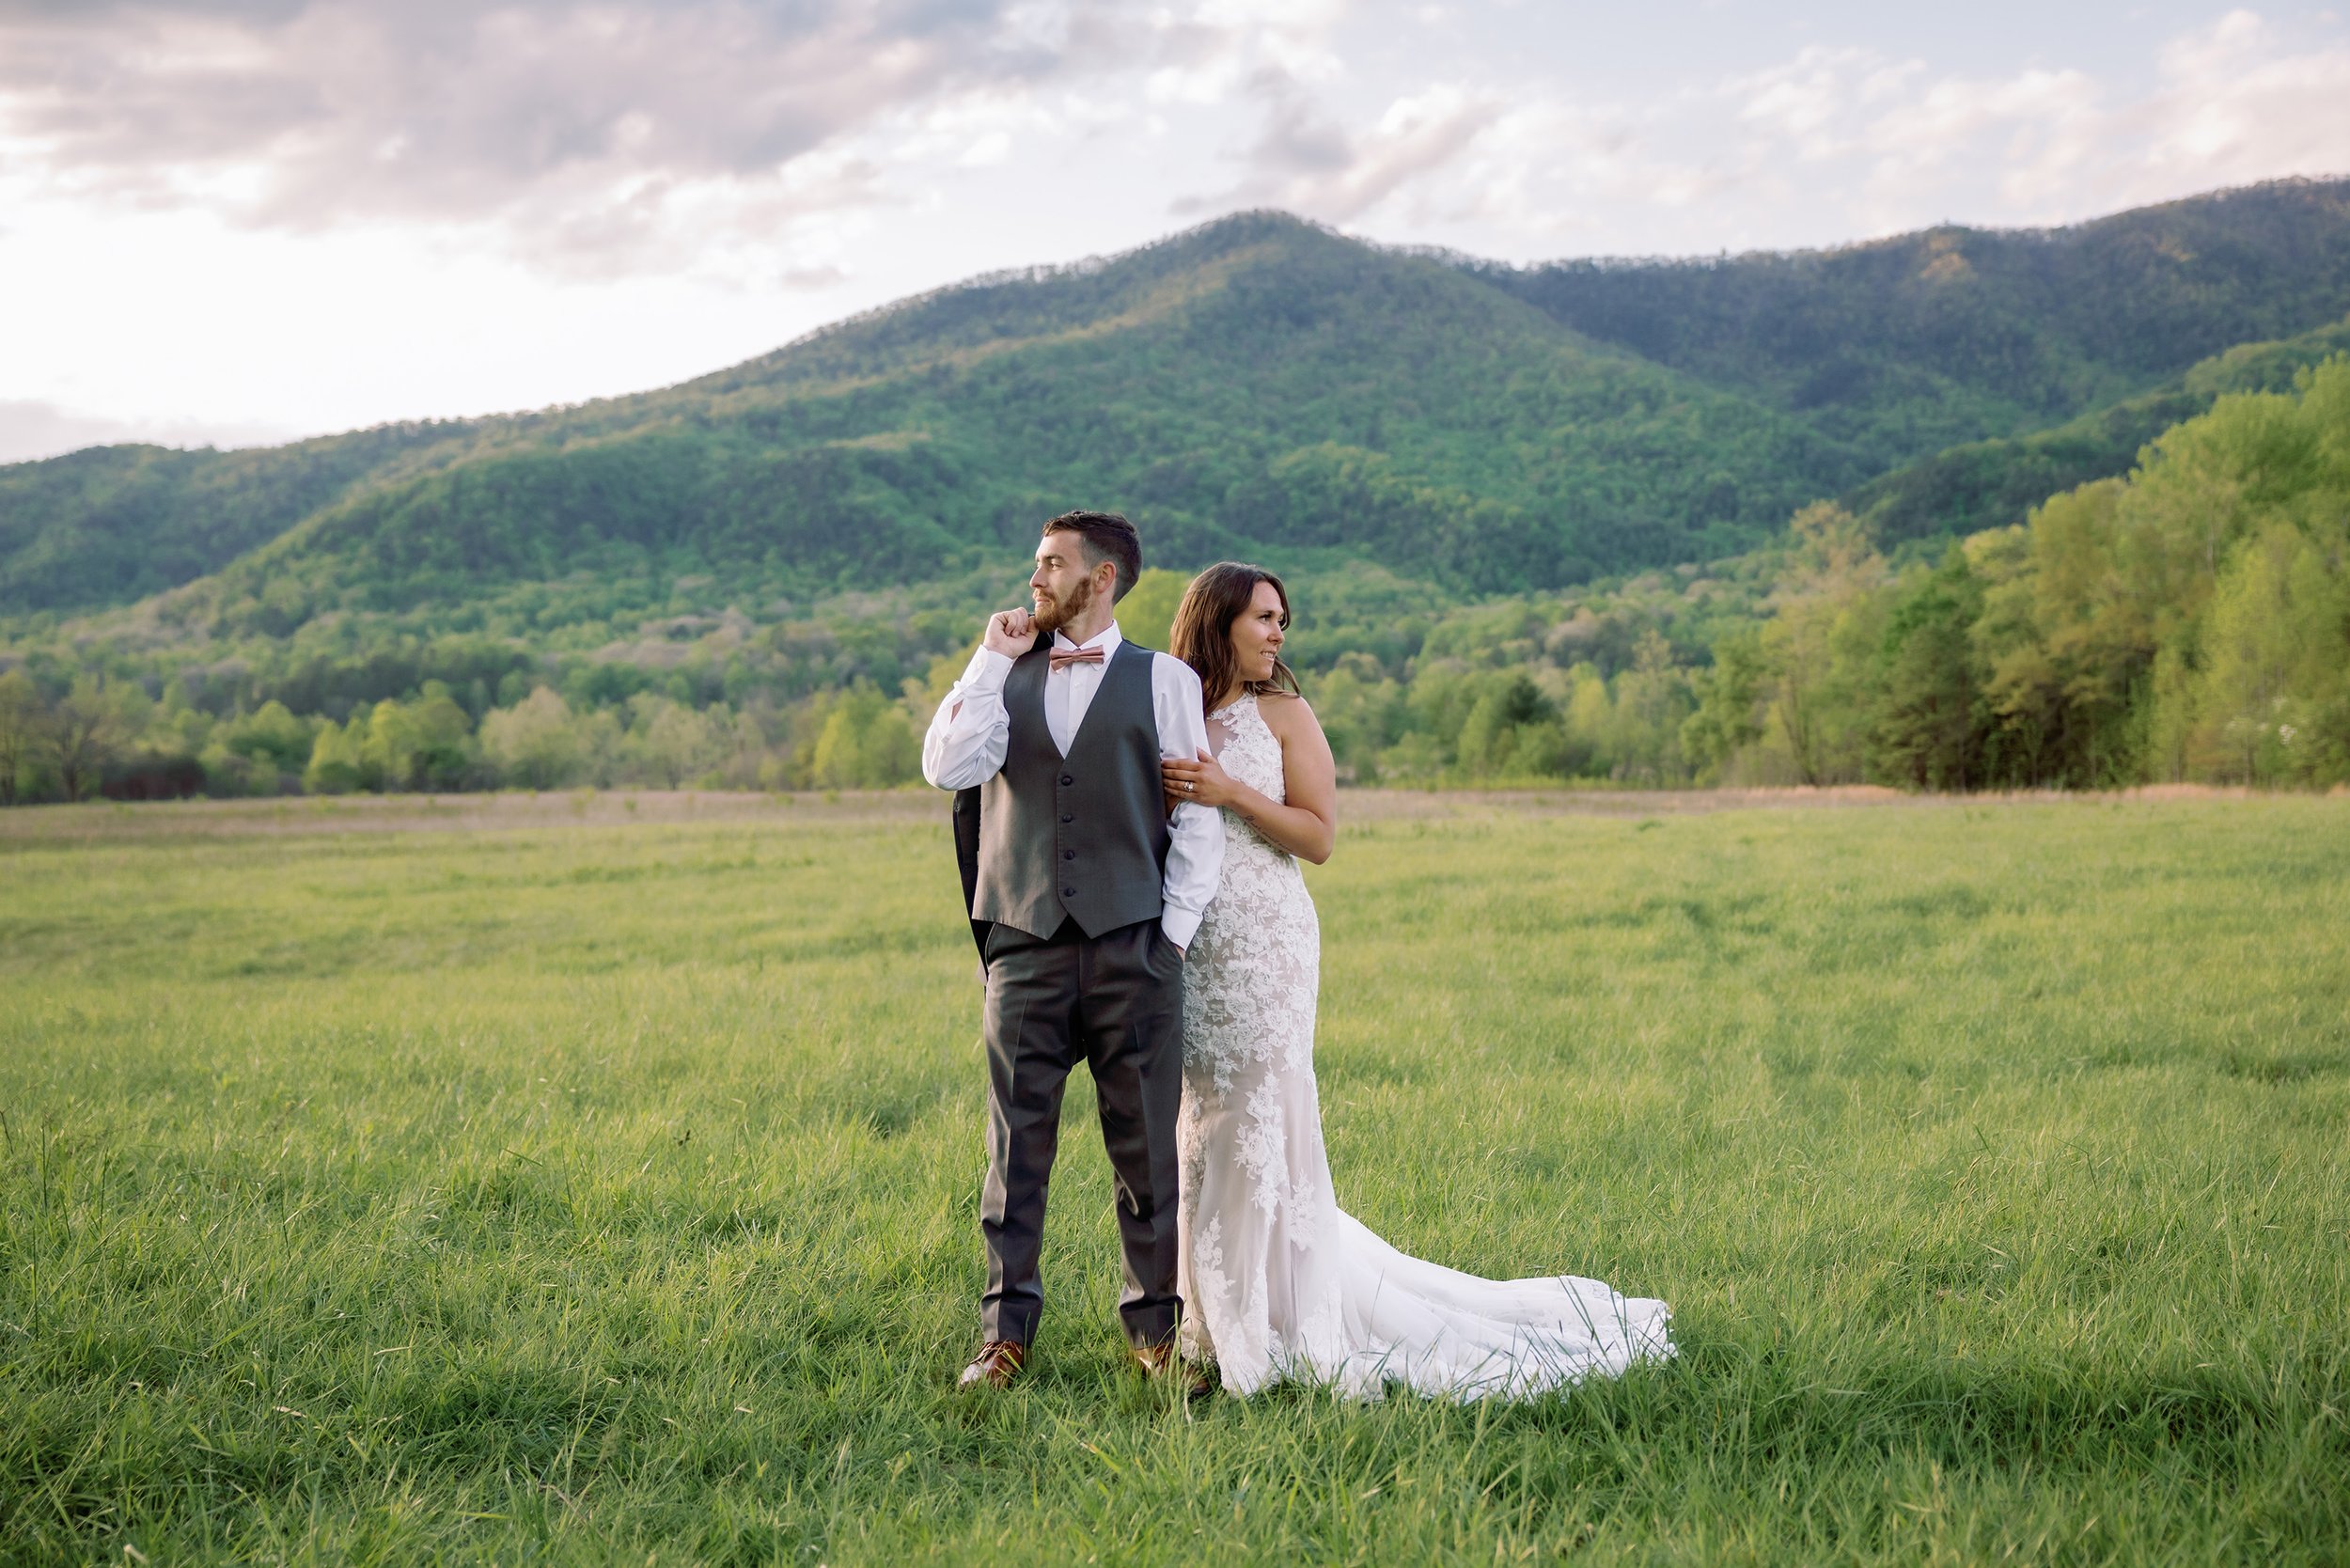 cades-cove-wedding-looking-opposite-directions.jpg